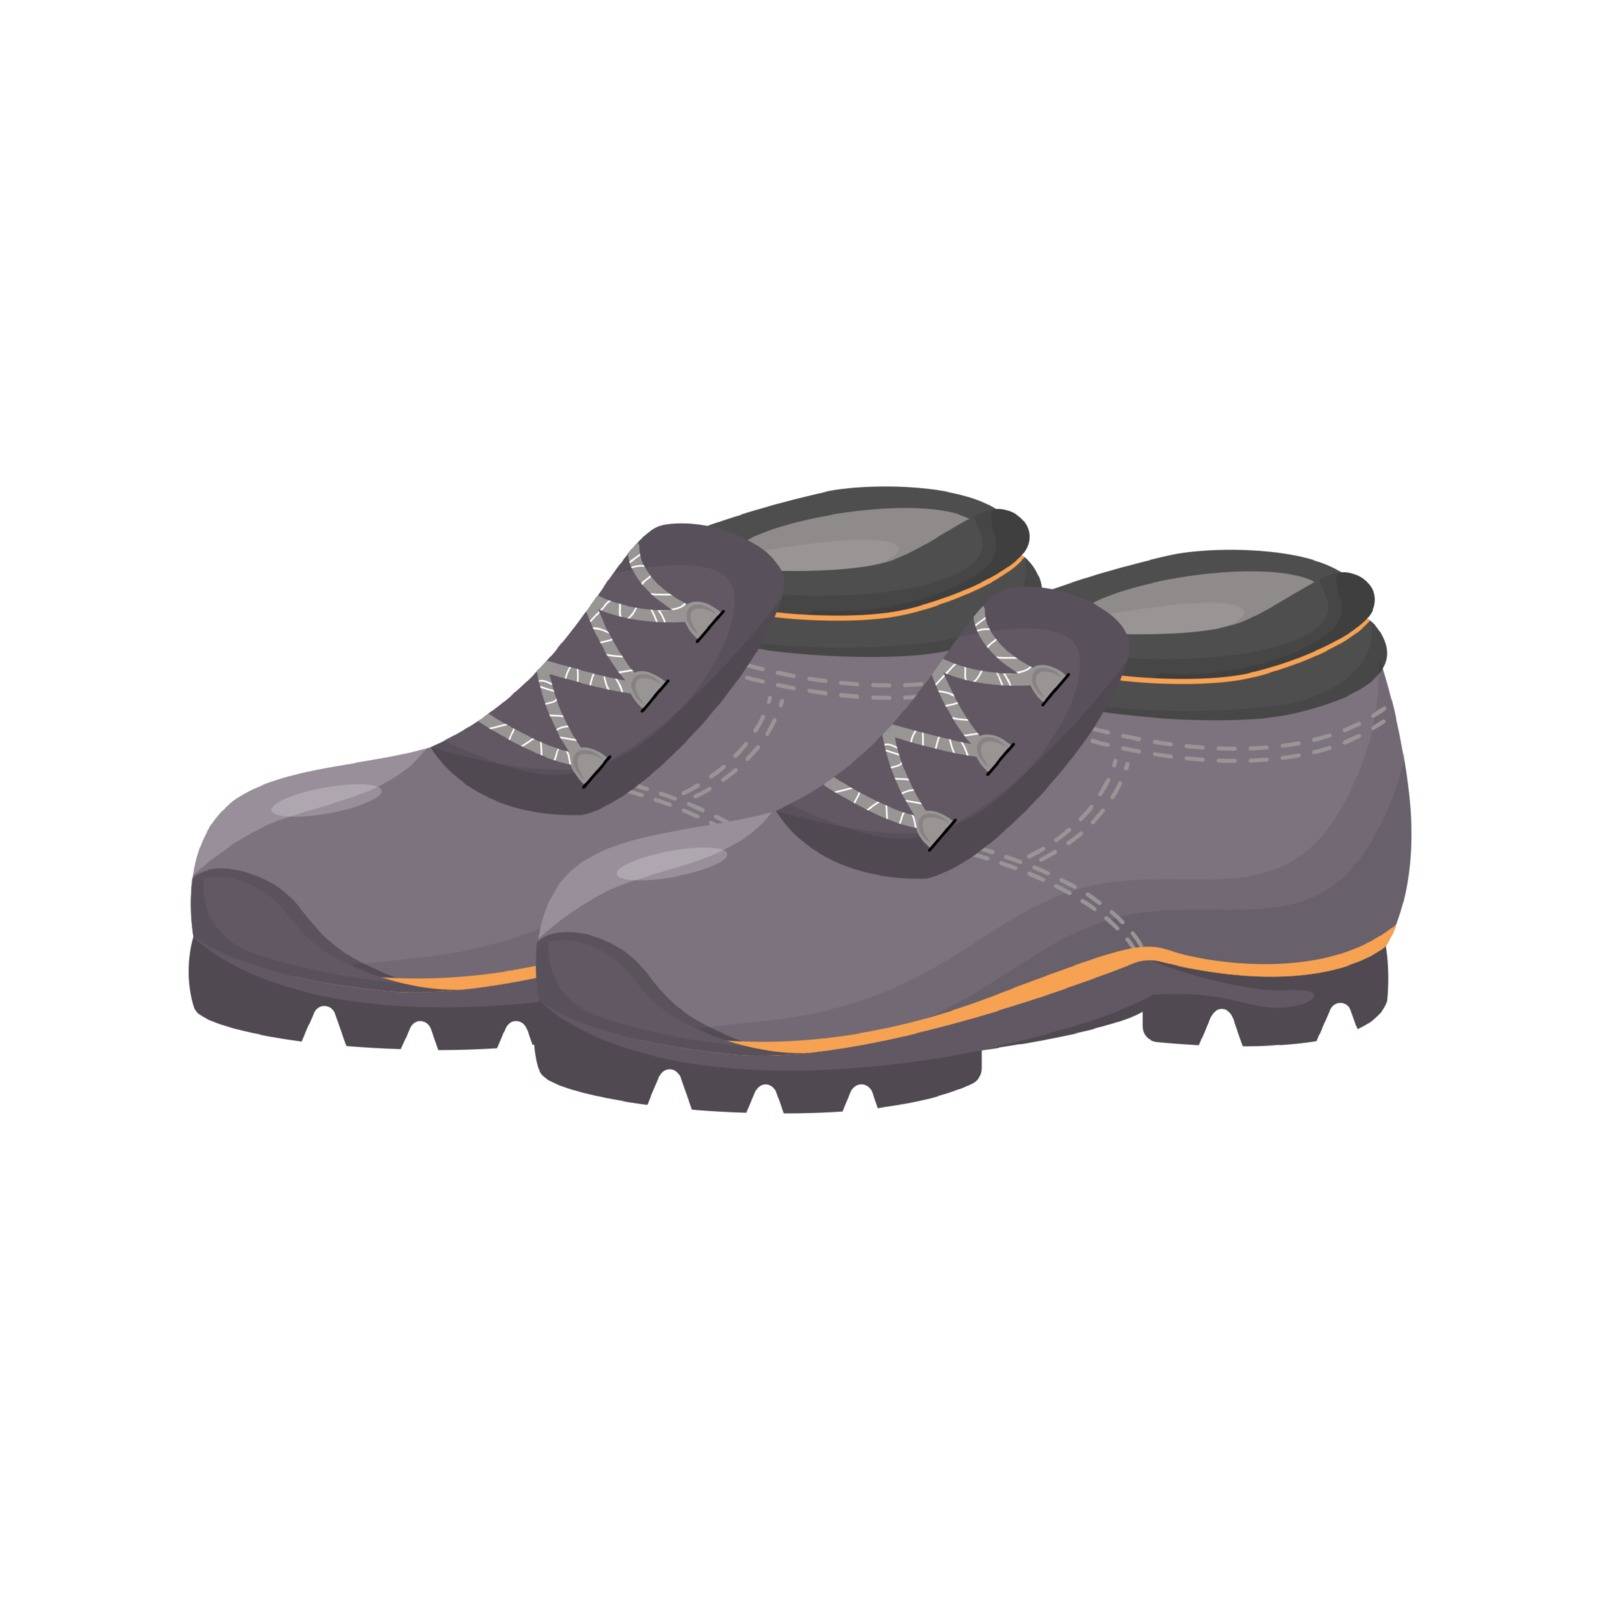 Rubber shoes, galoshes cartoon vector illustration. Personal protective equipment, gardening and industrial waterproof boots. Seasonal footwear. Gray gumboots isolated on white background